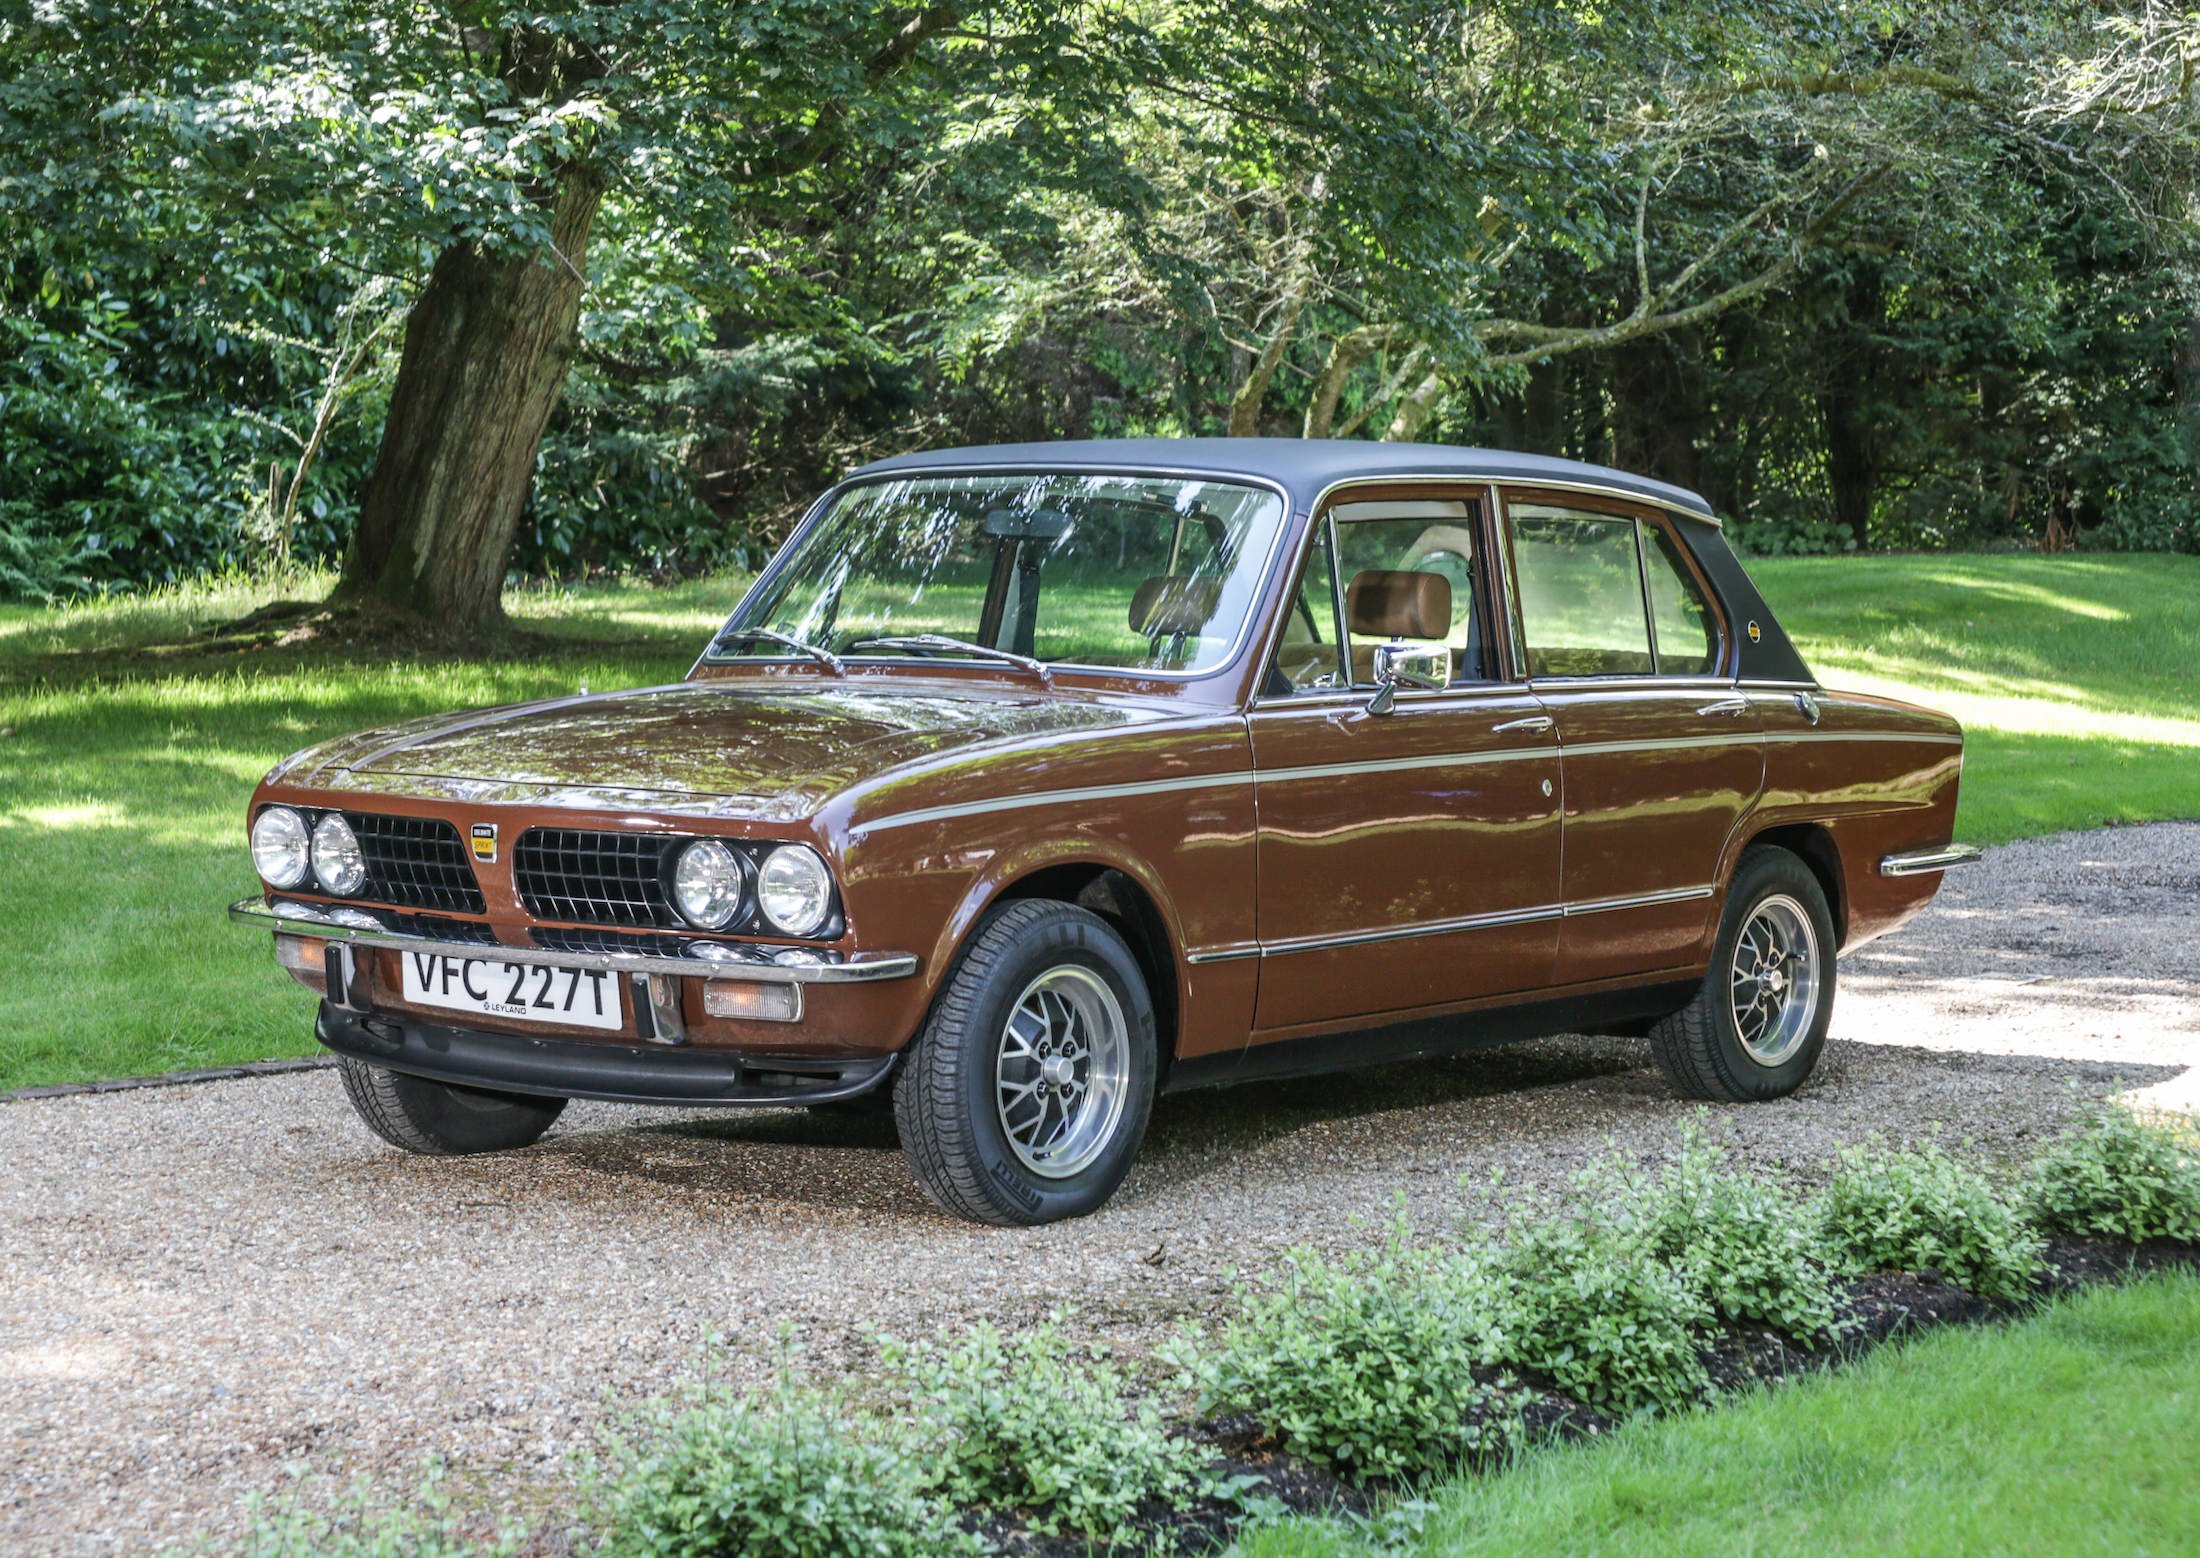 The Triumph Dolomite Sprint – The Affordable British Answer To BMW 2002